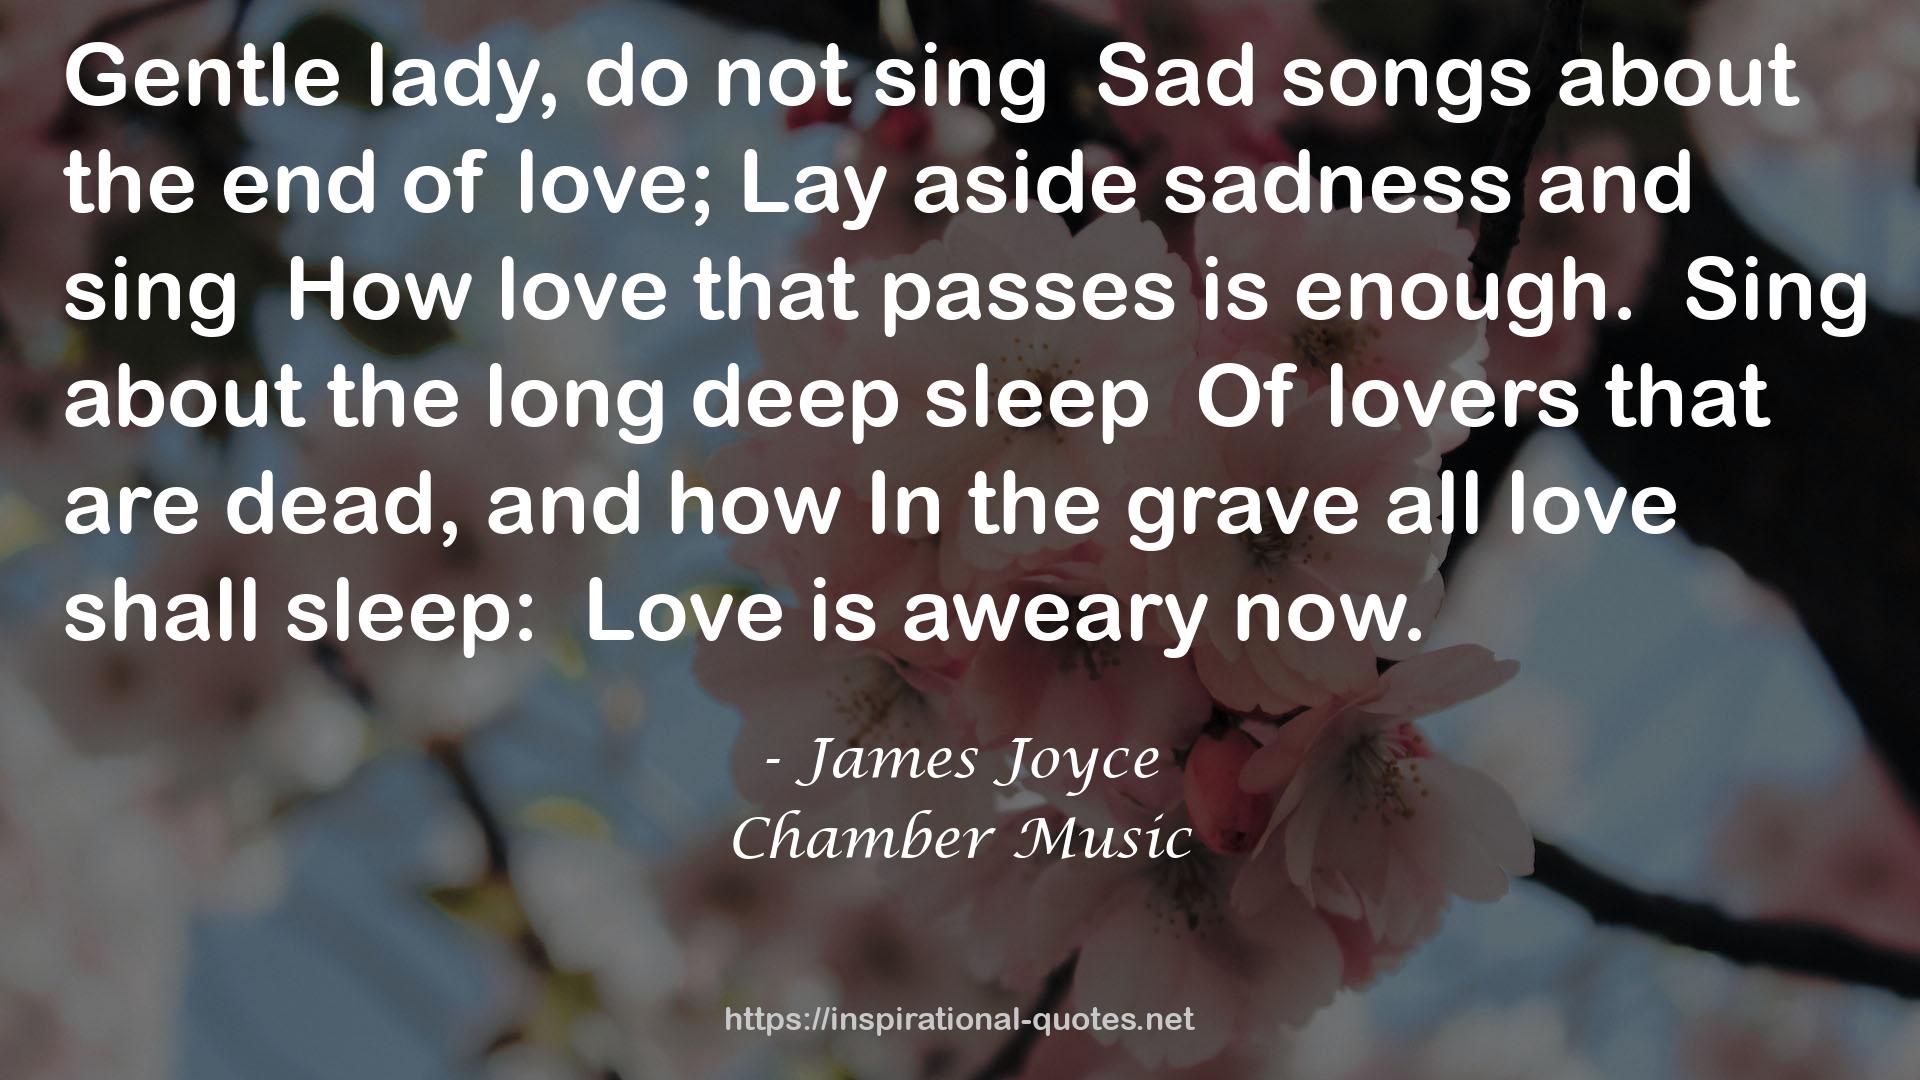 Chamber Music QUOTES